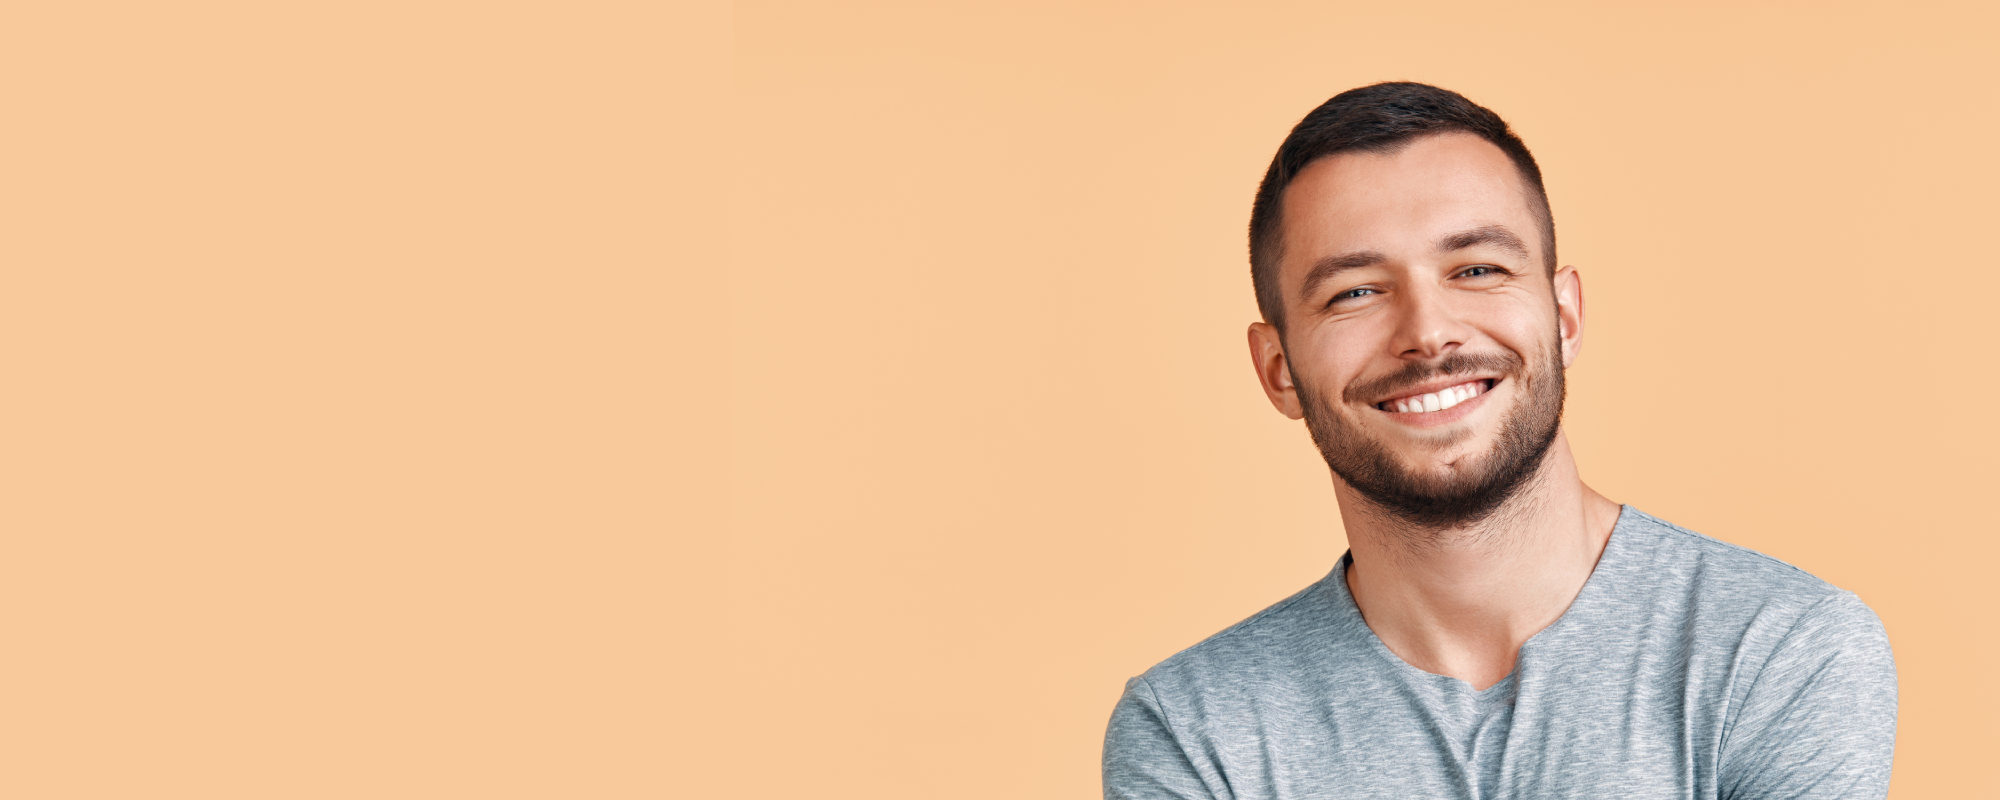 man smiling with grey shirt on on peach background